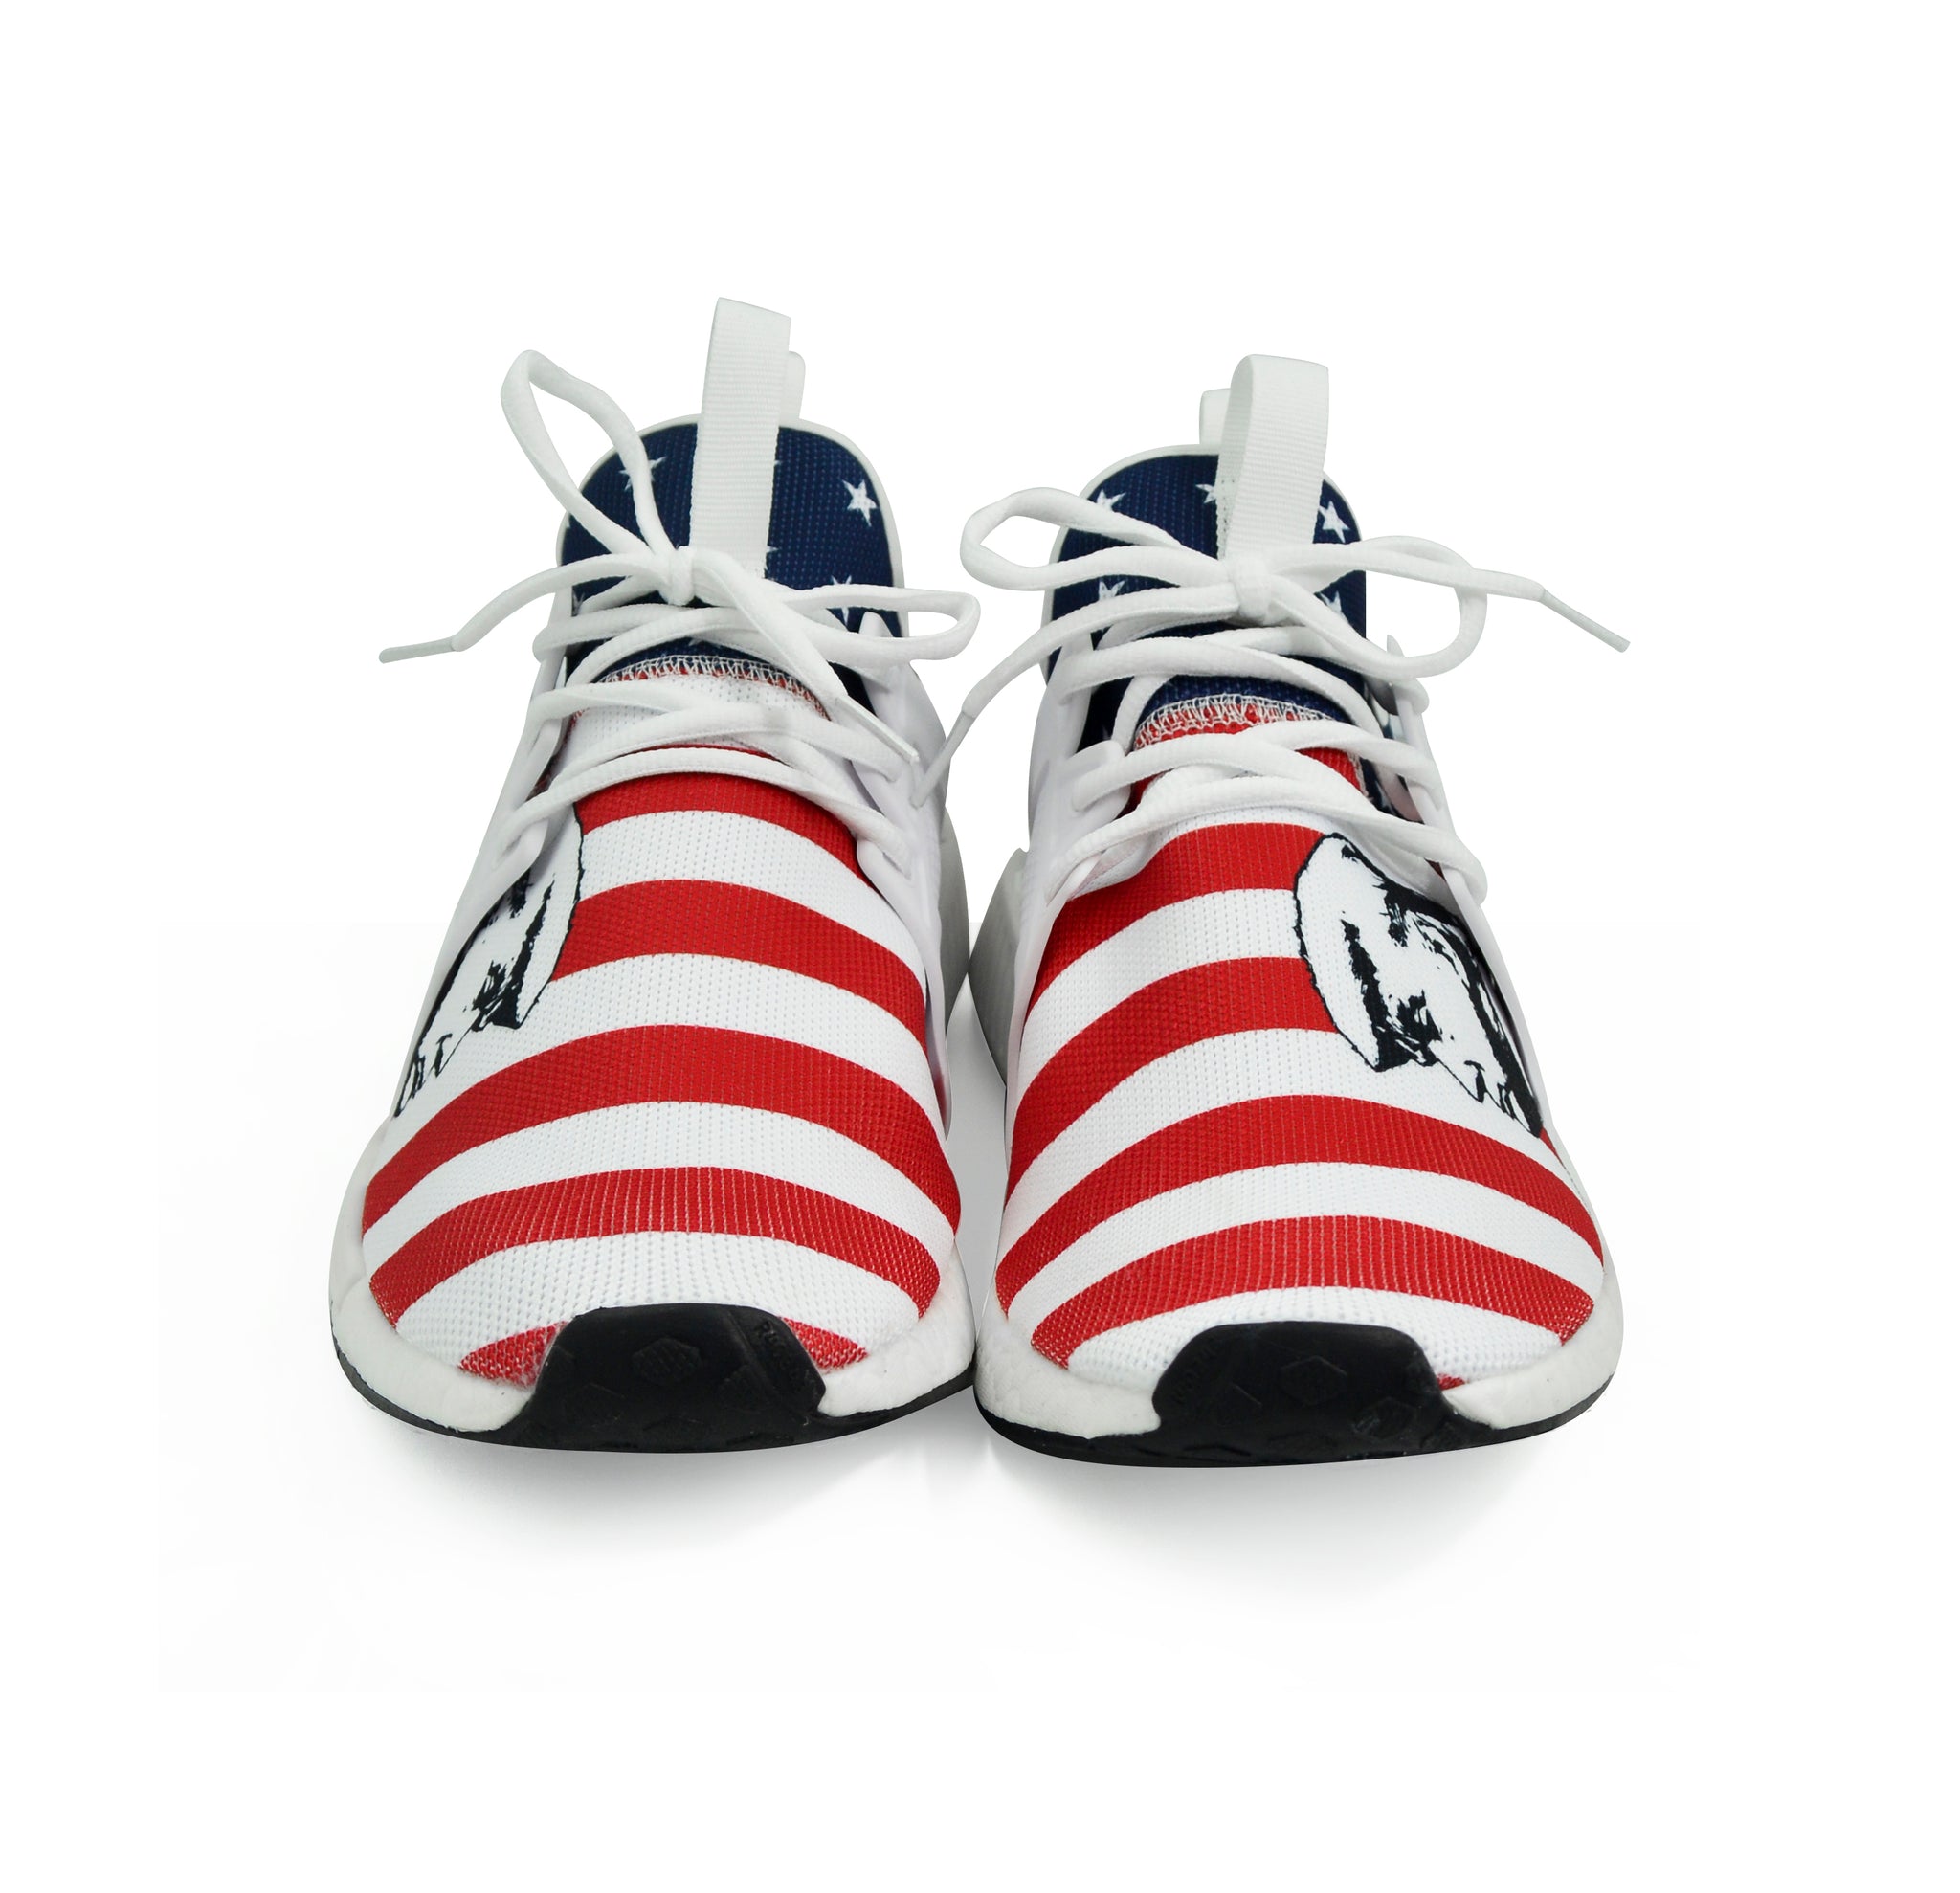 american flag nmds shoes